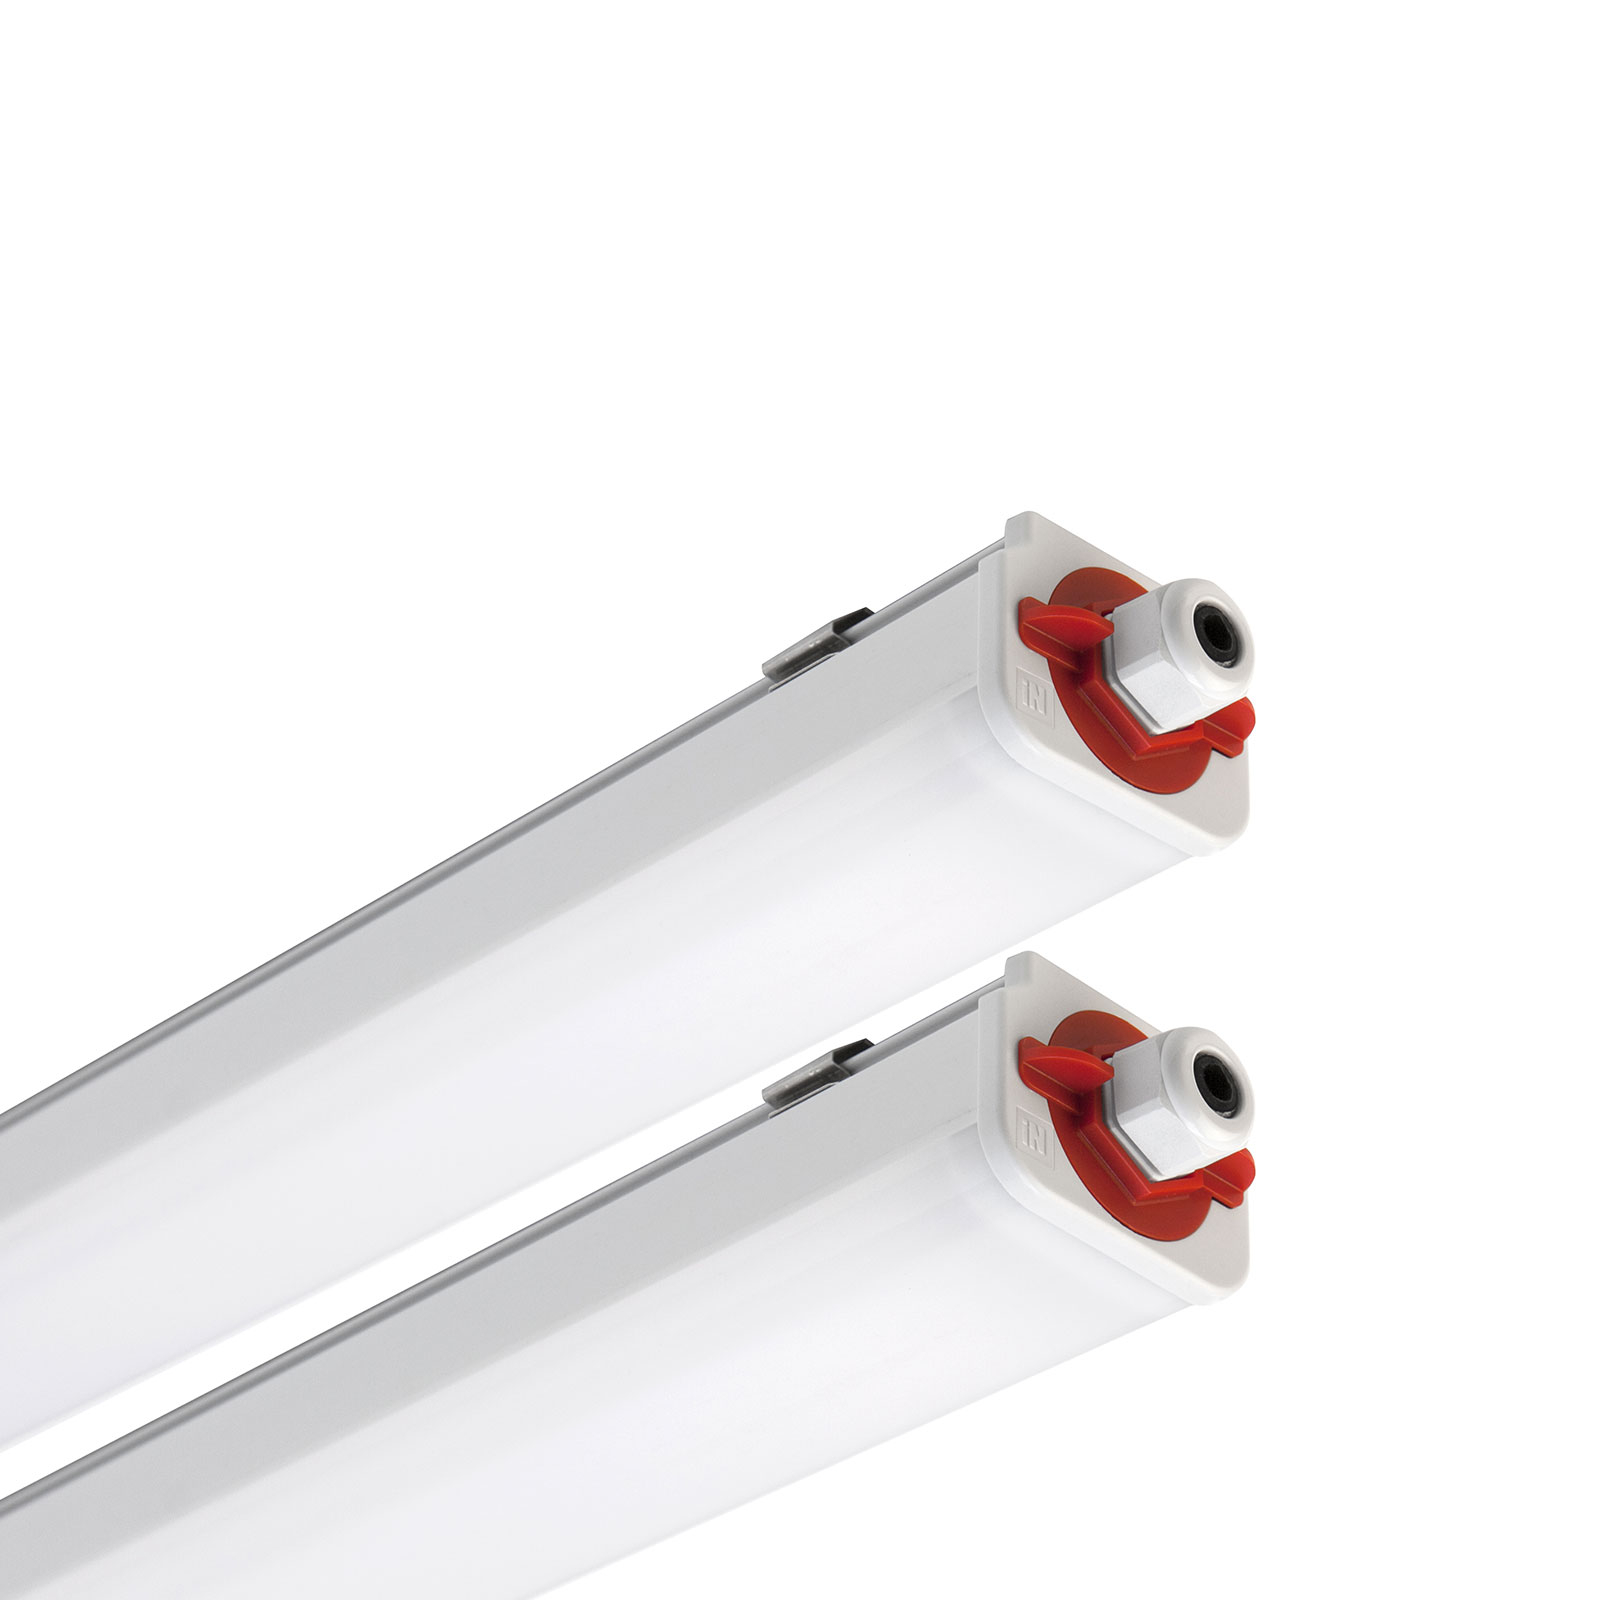 LED-kattovalaisin Norma+120 CL, 45W, 6795lm 120cm